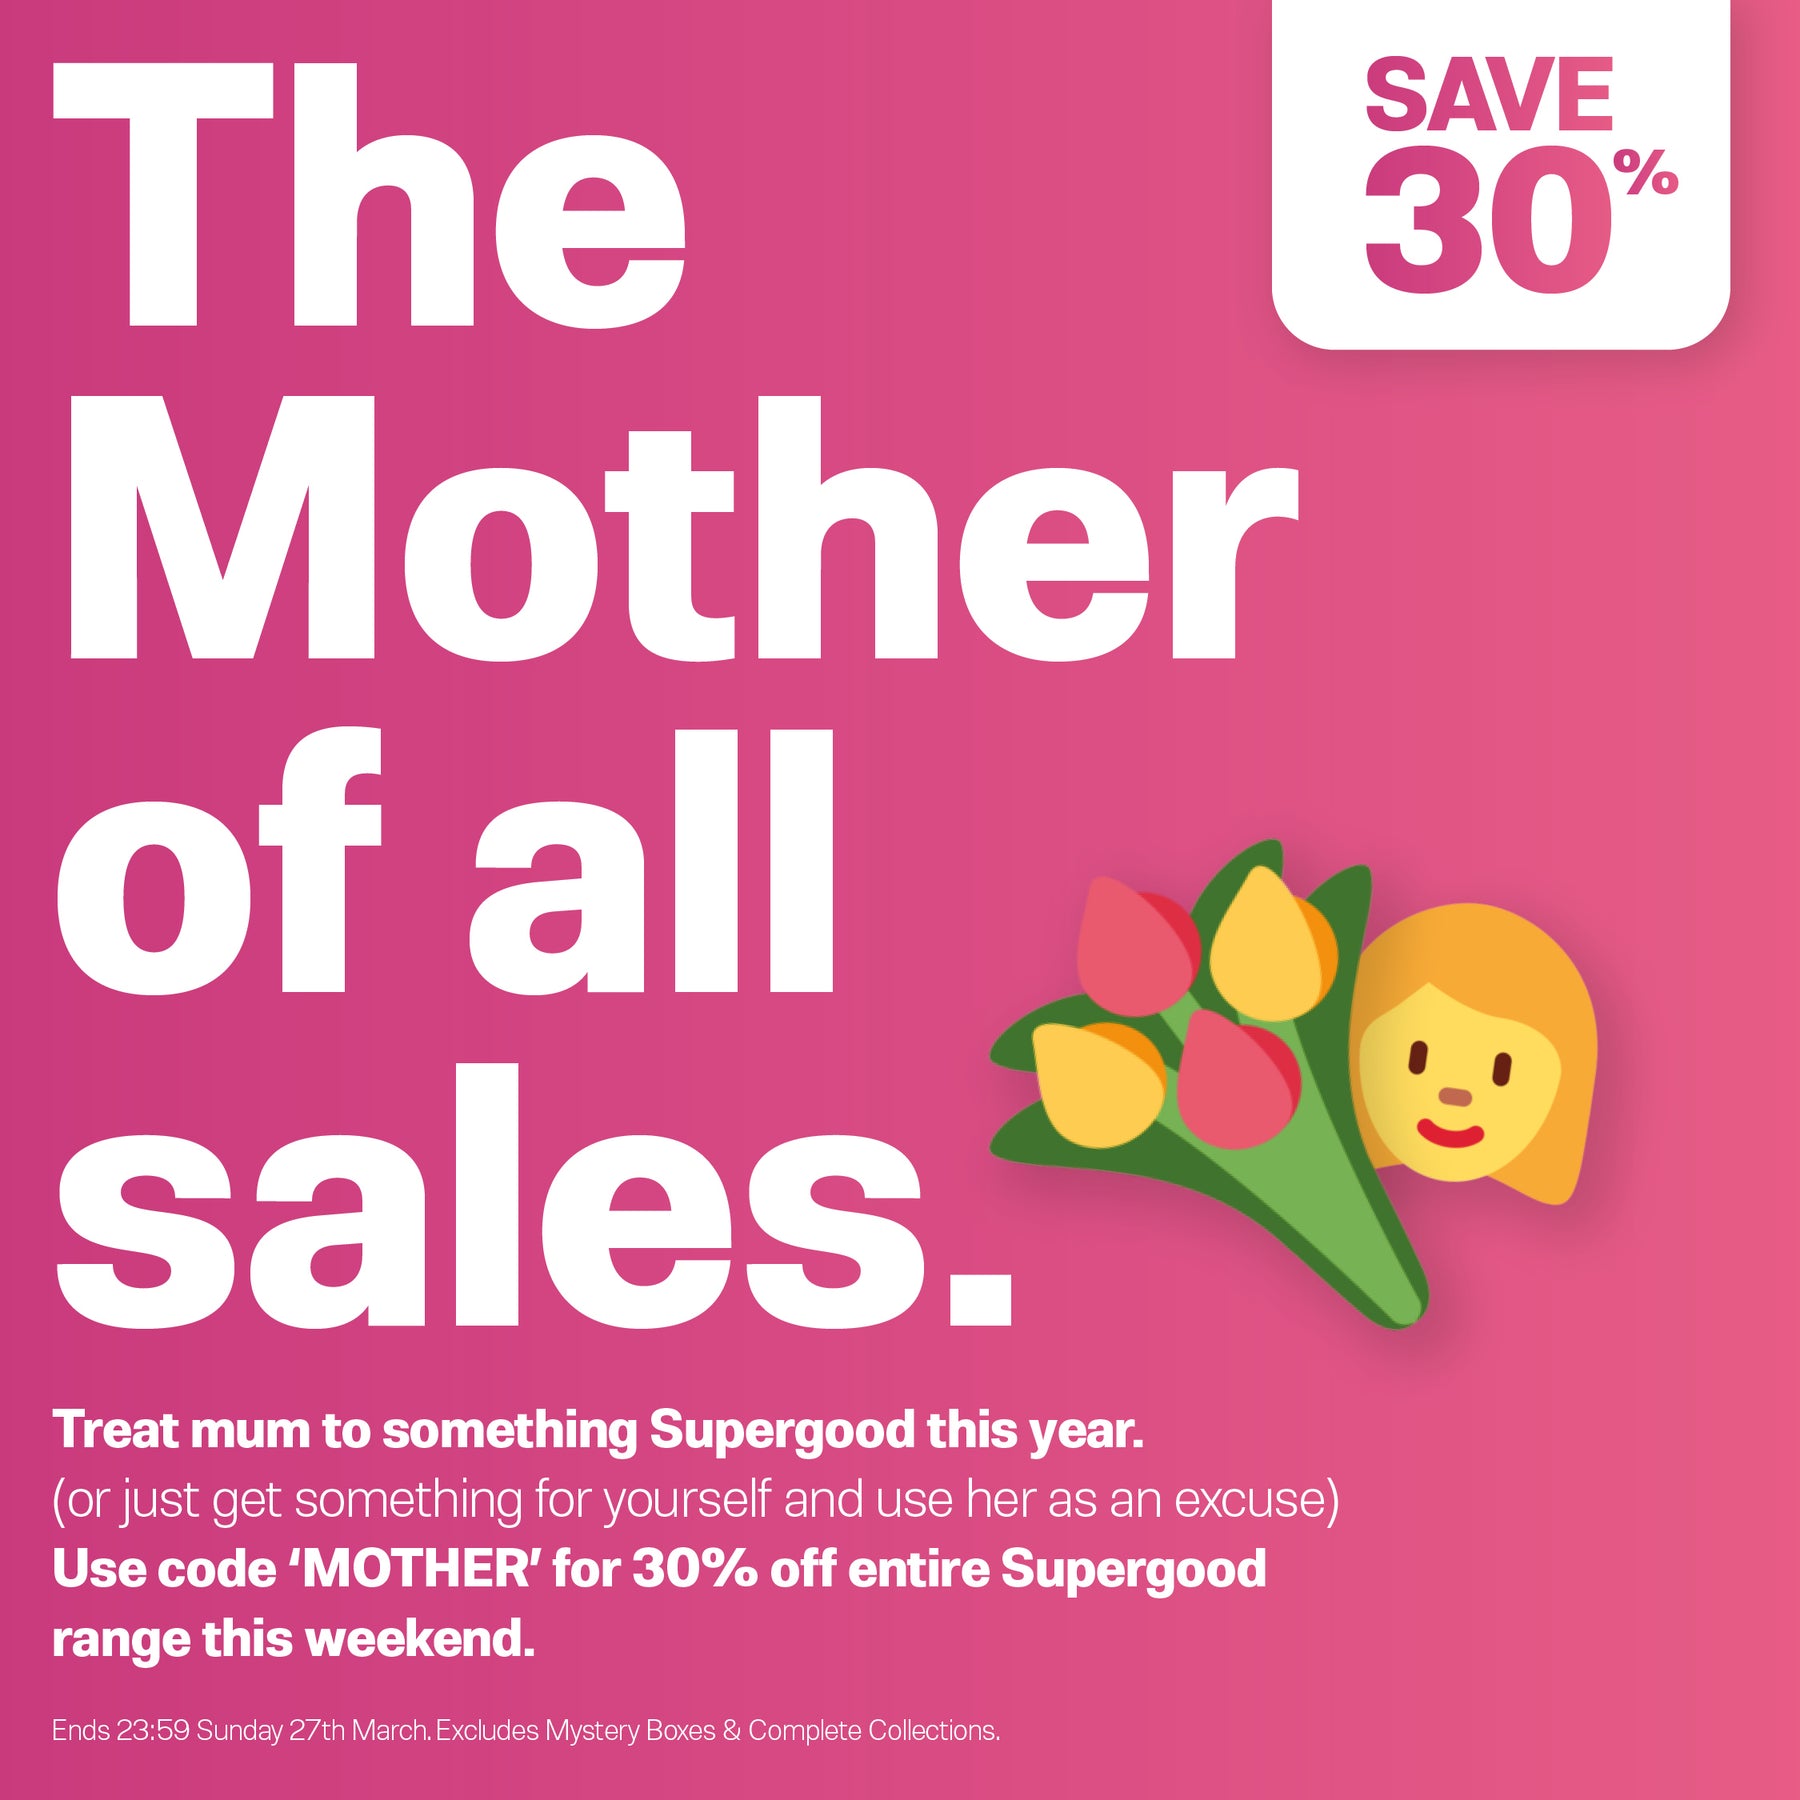 The Mother of all sales.